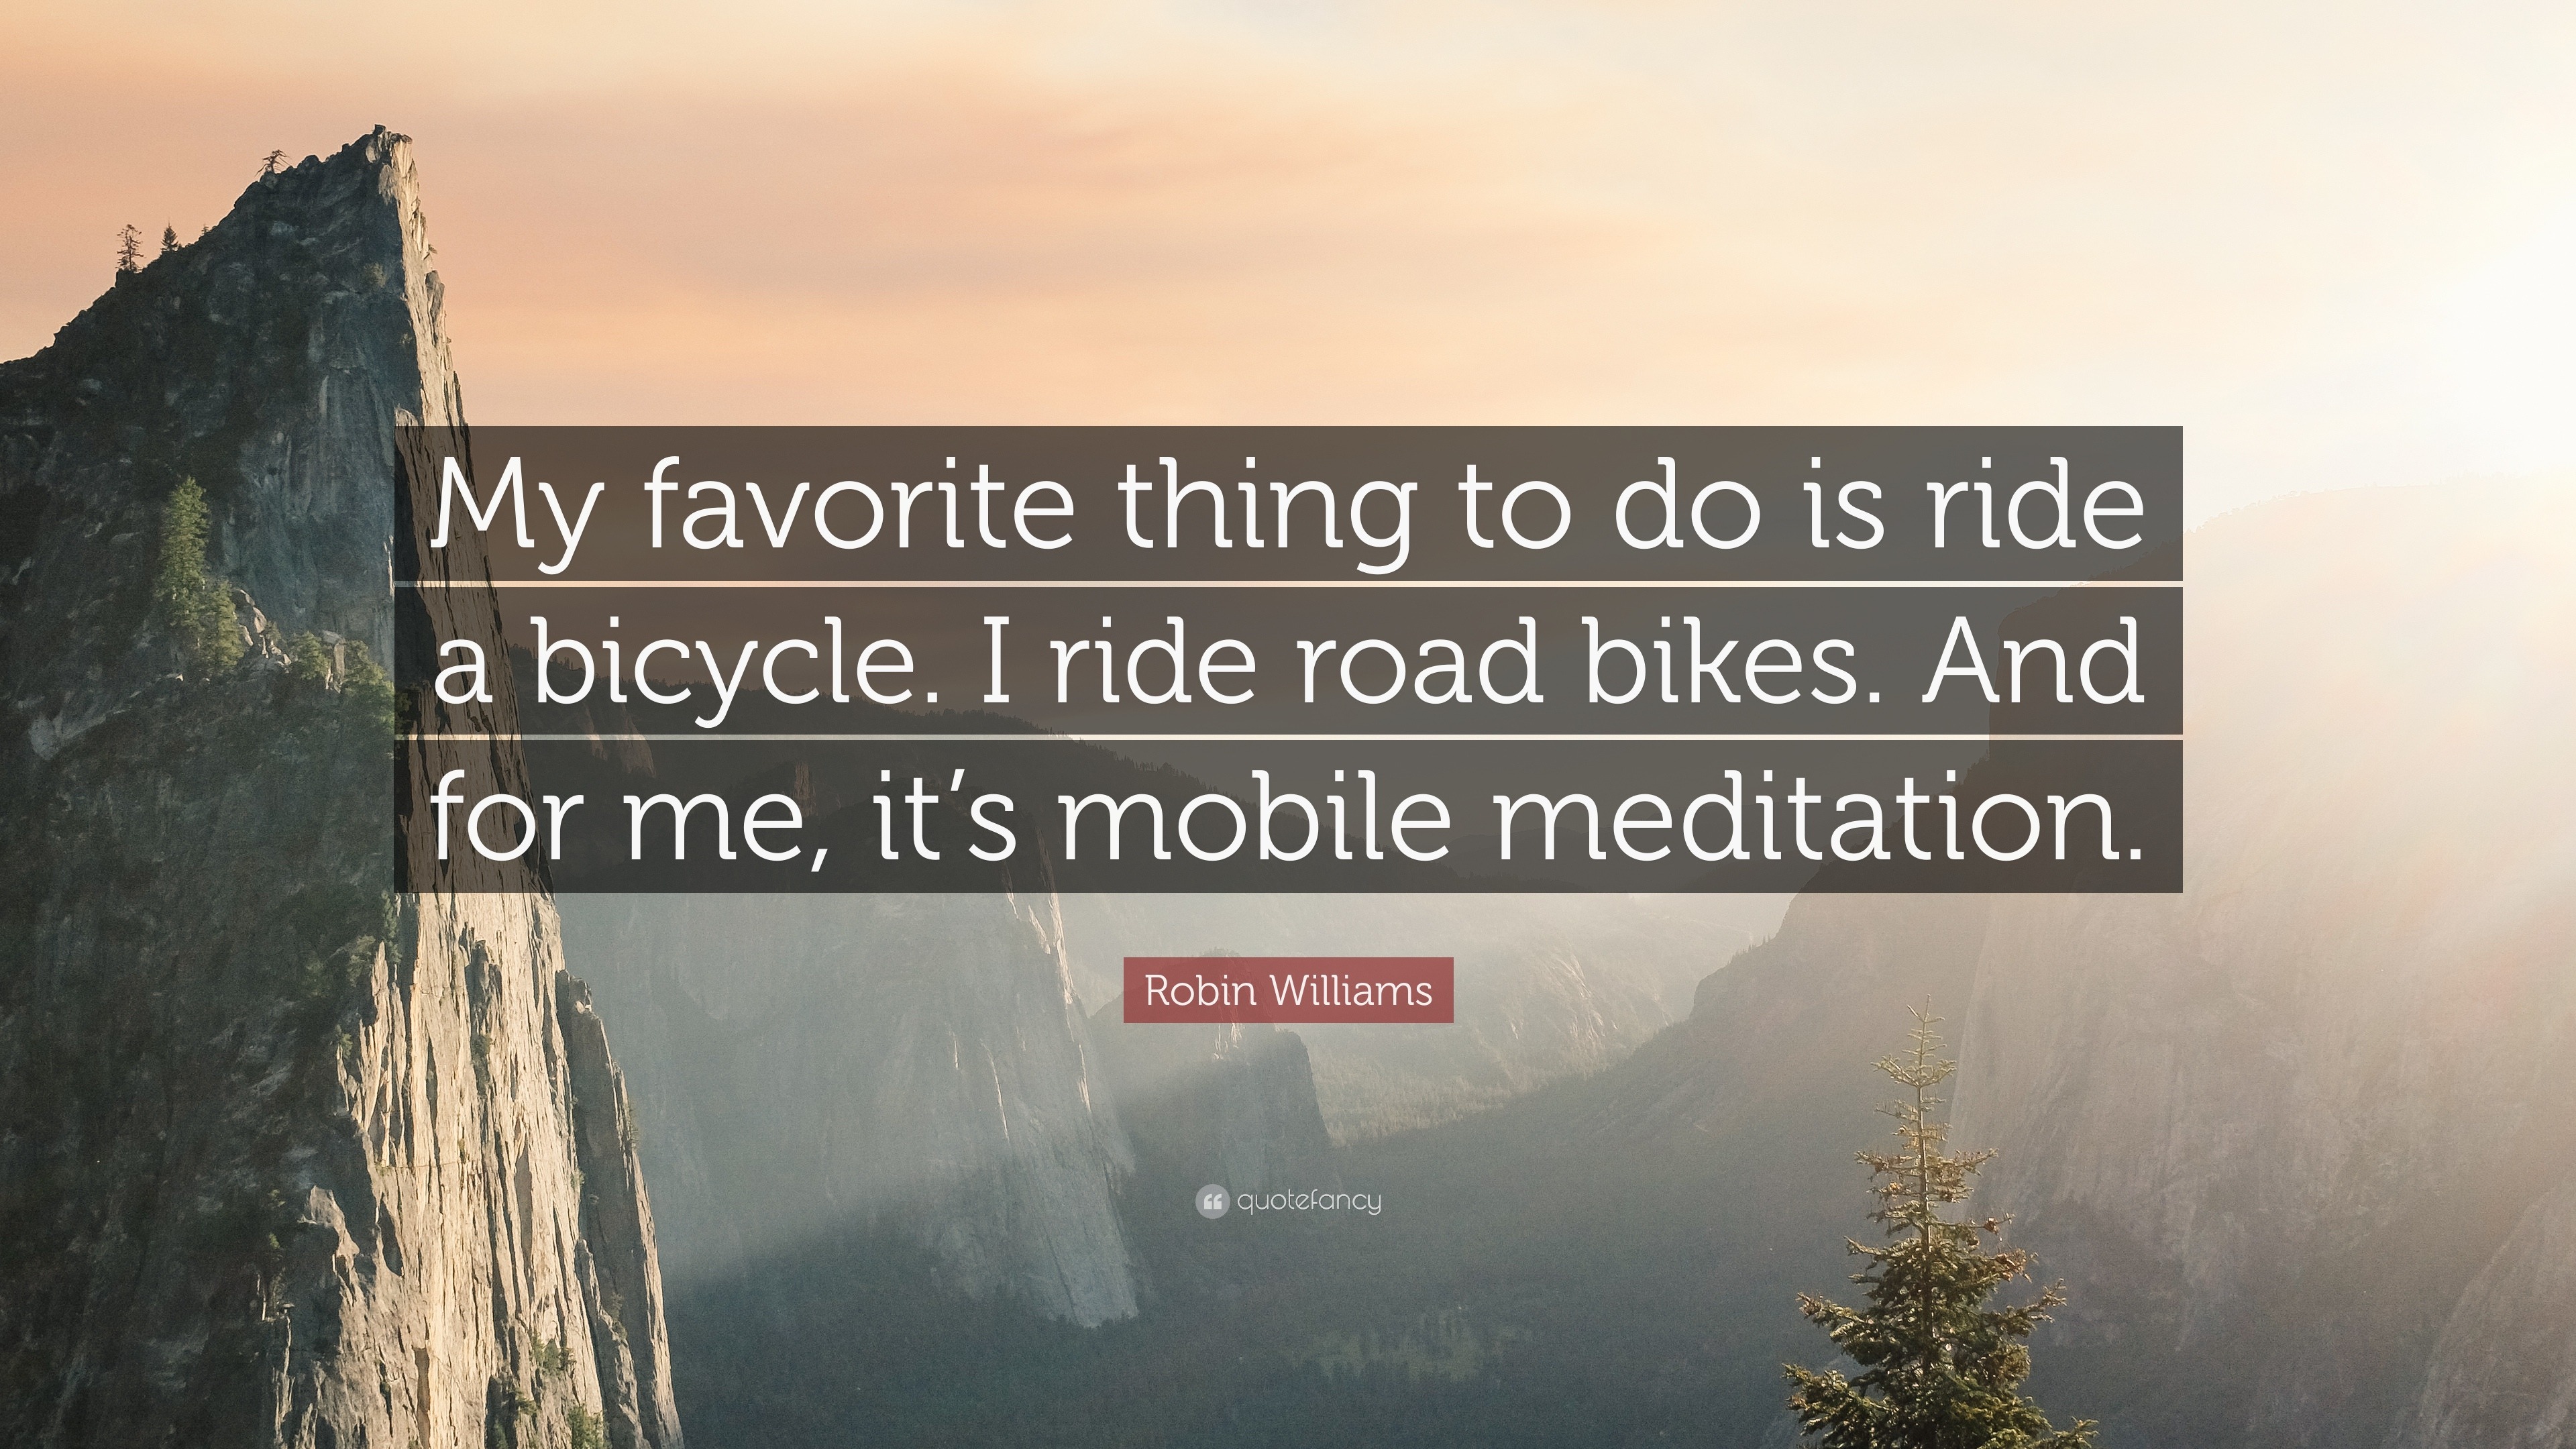 Robin Williams Quote My Favorite Thing To Do Is Ride A Bicycle I Ride Road Bikes And For Me It S Mobile Meditation 10 Wallpapers Quotefancy